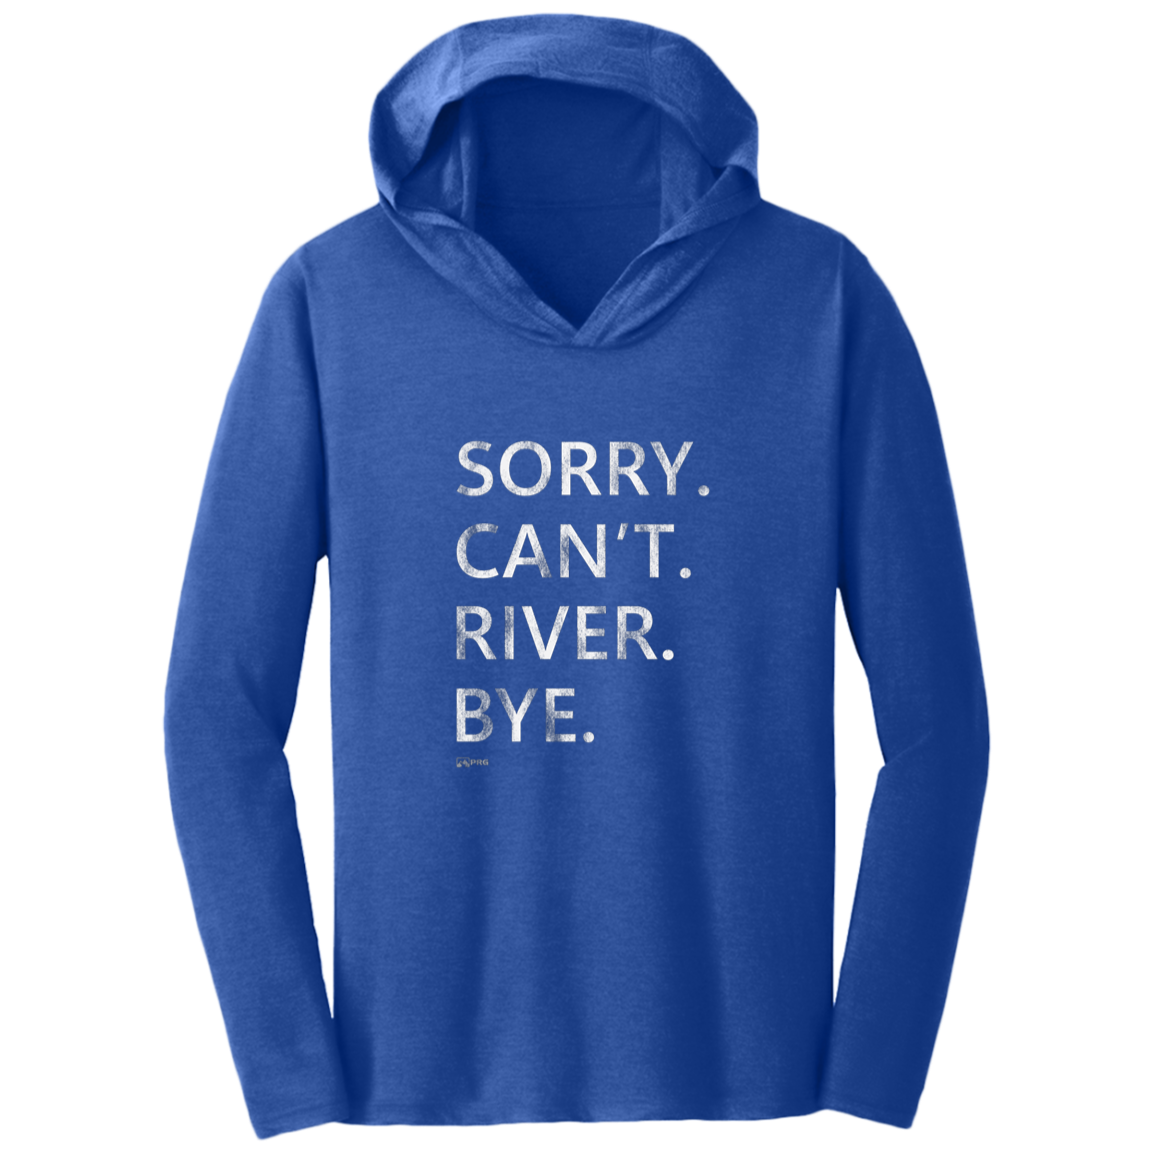 Sorry. Can't. River. Bye. - Shirt Hoodie